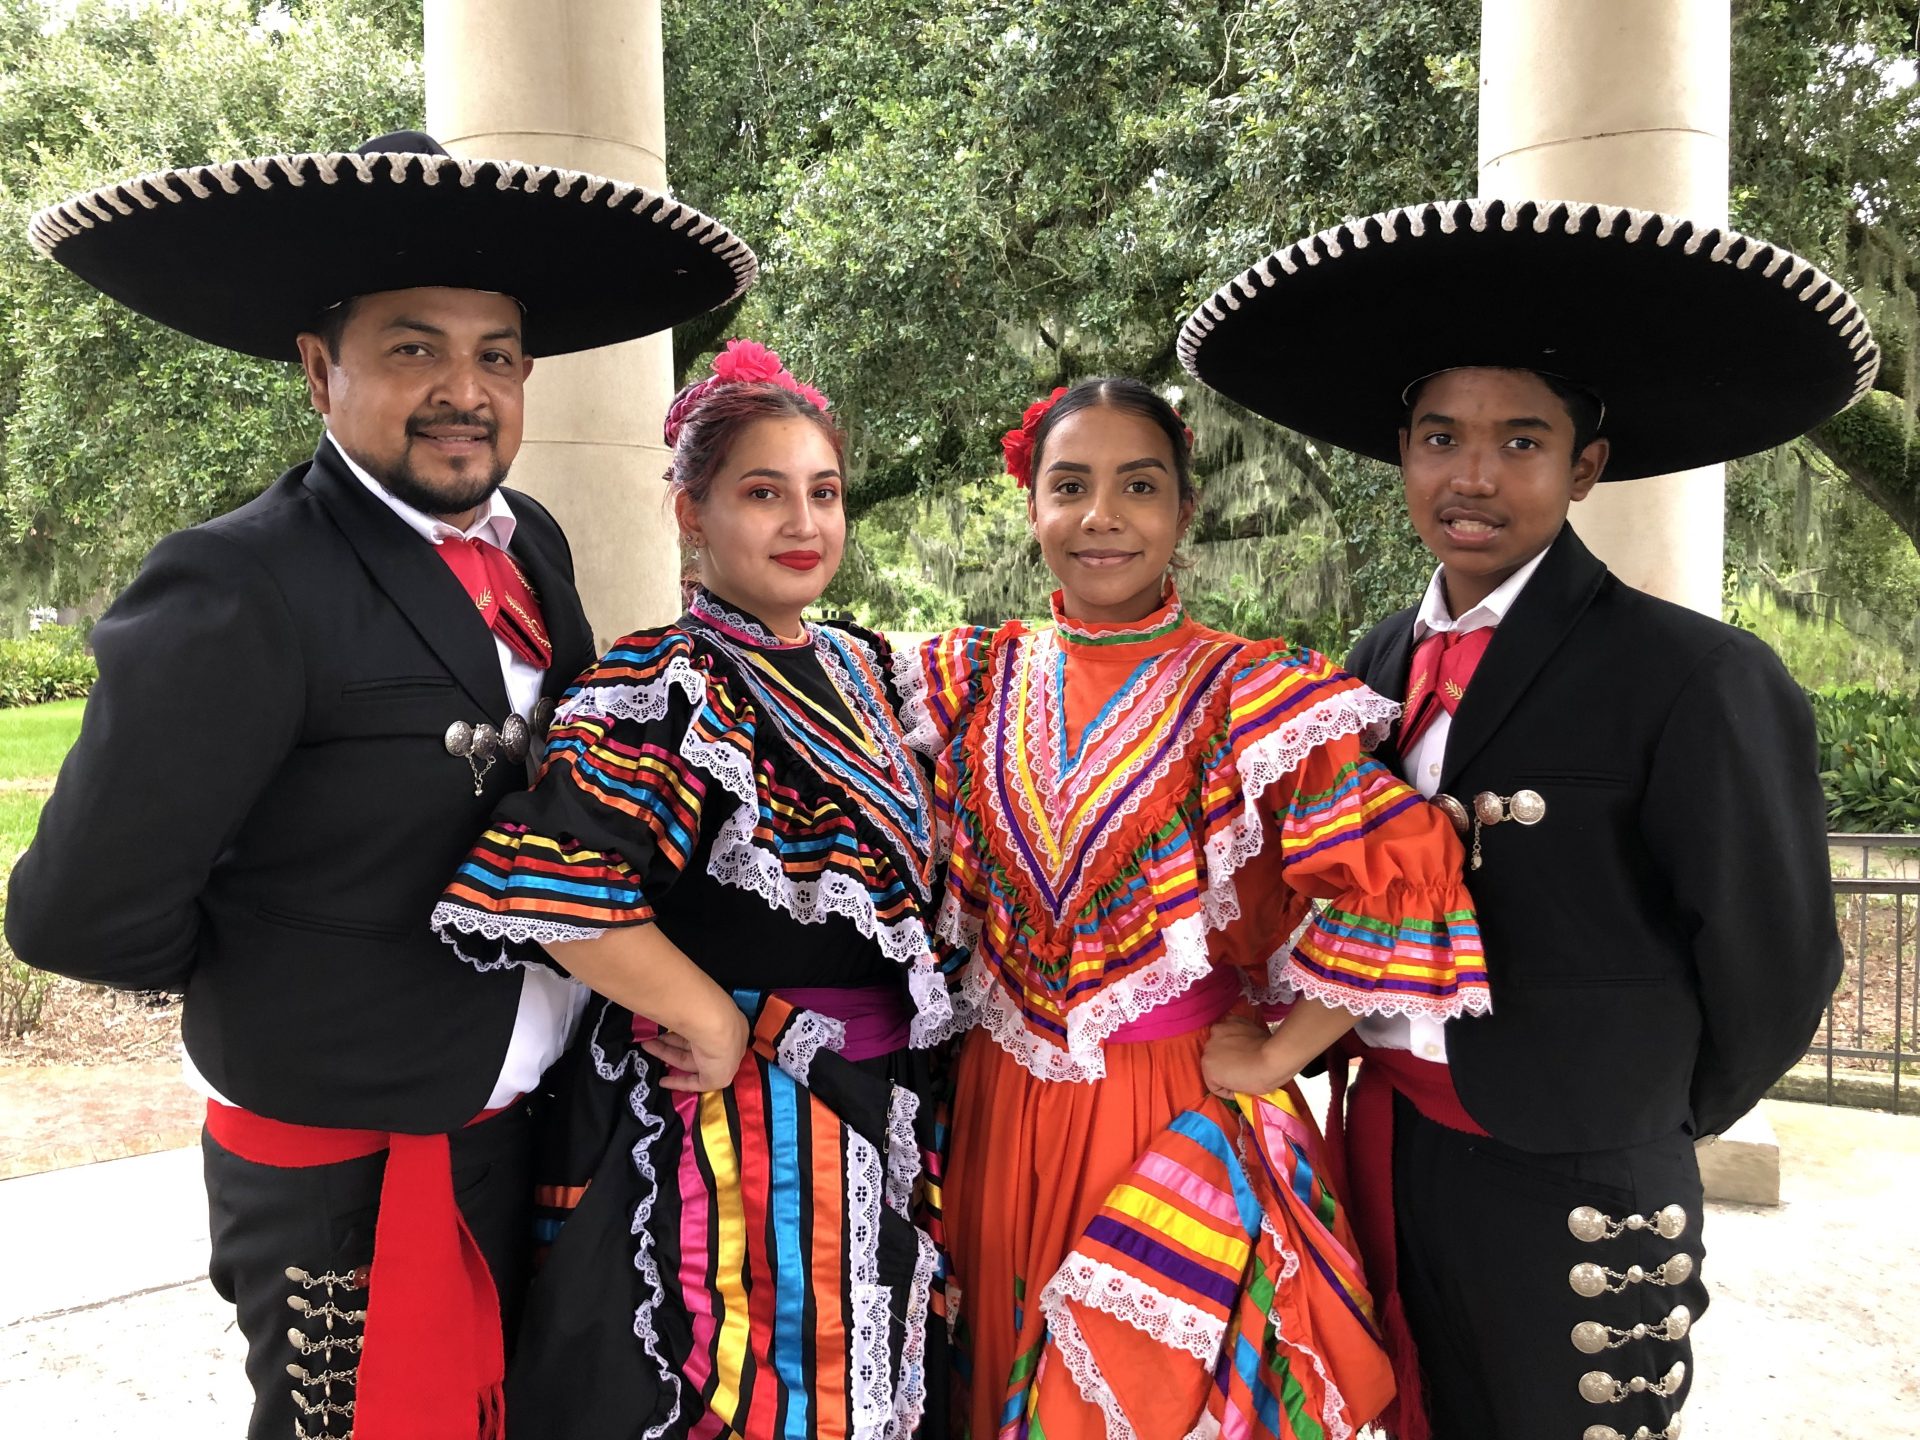 Suit up! Honoring Latino heritage on the field